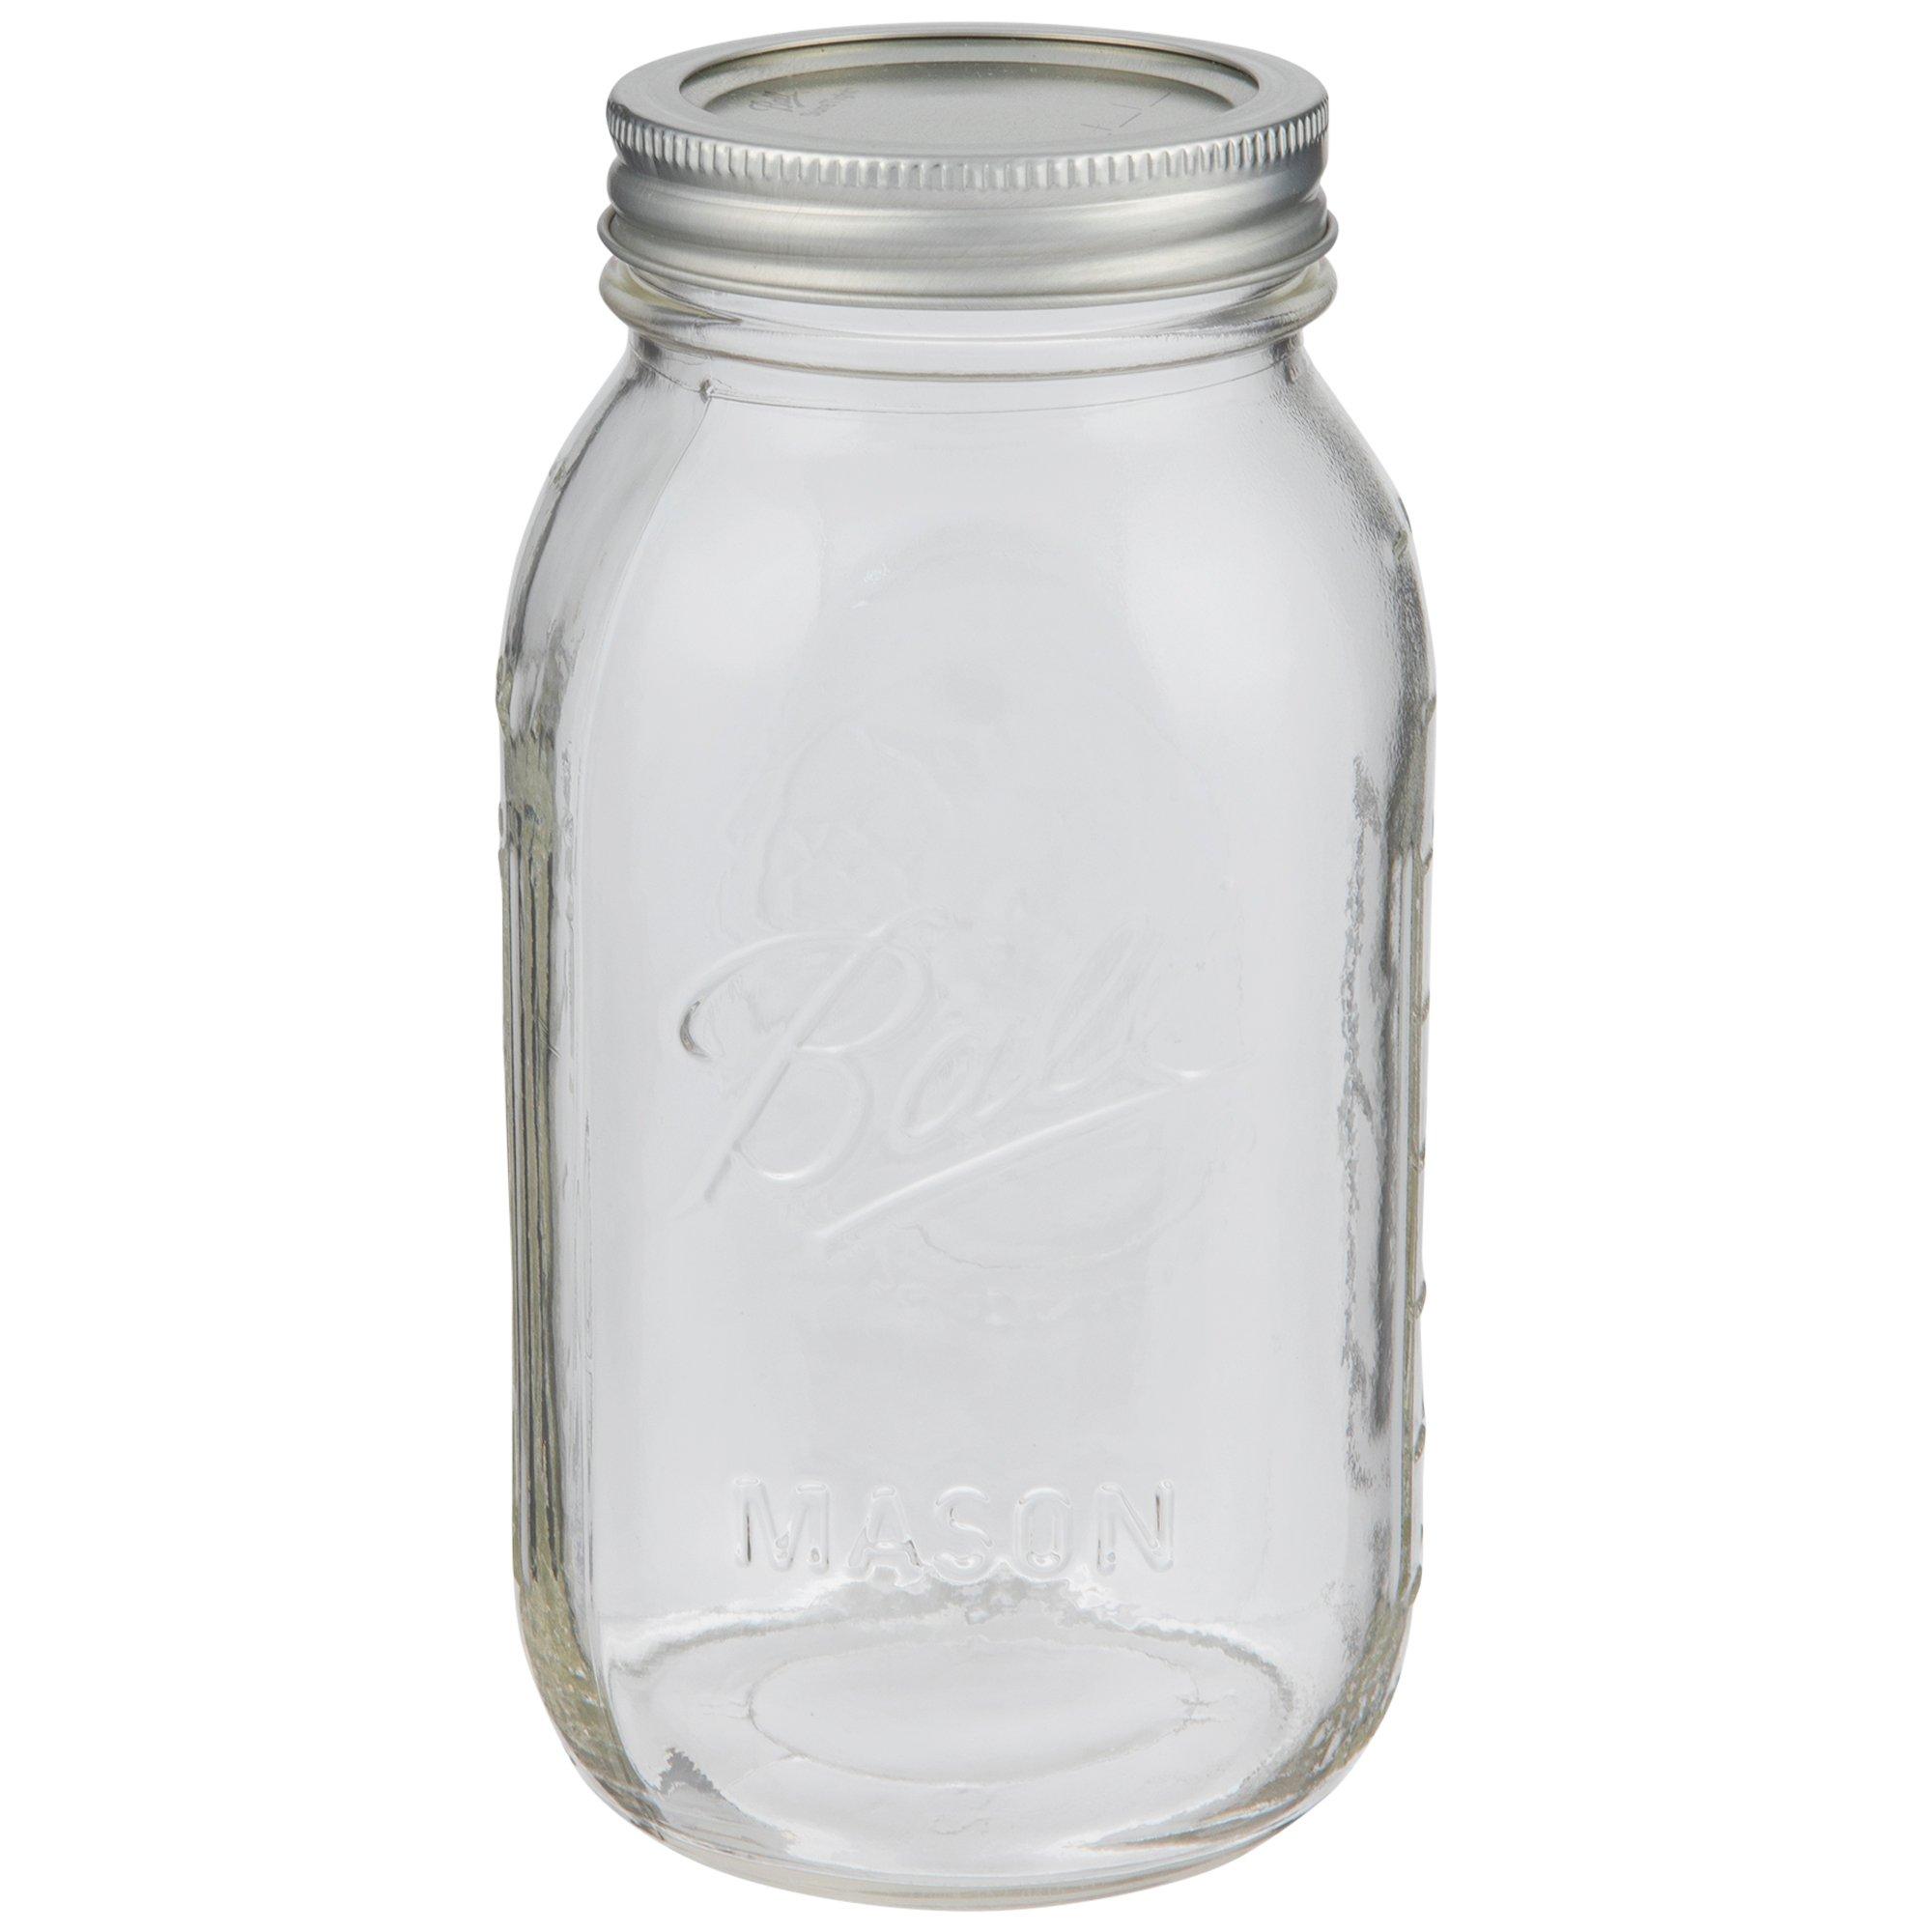 32 oz Glass Jars with Lid For Household, Food Grade Clear Jars (6